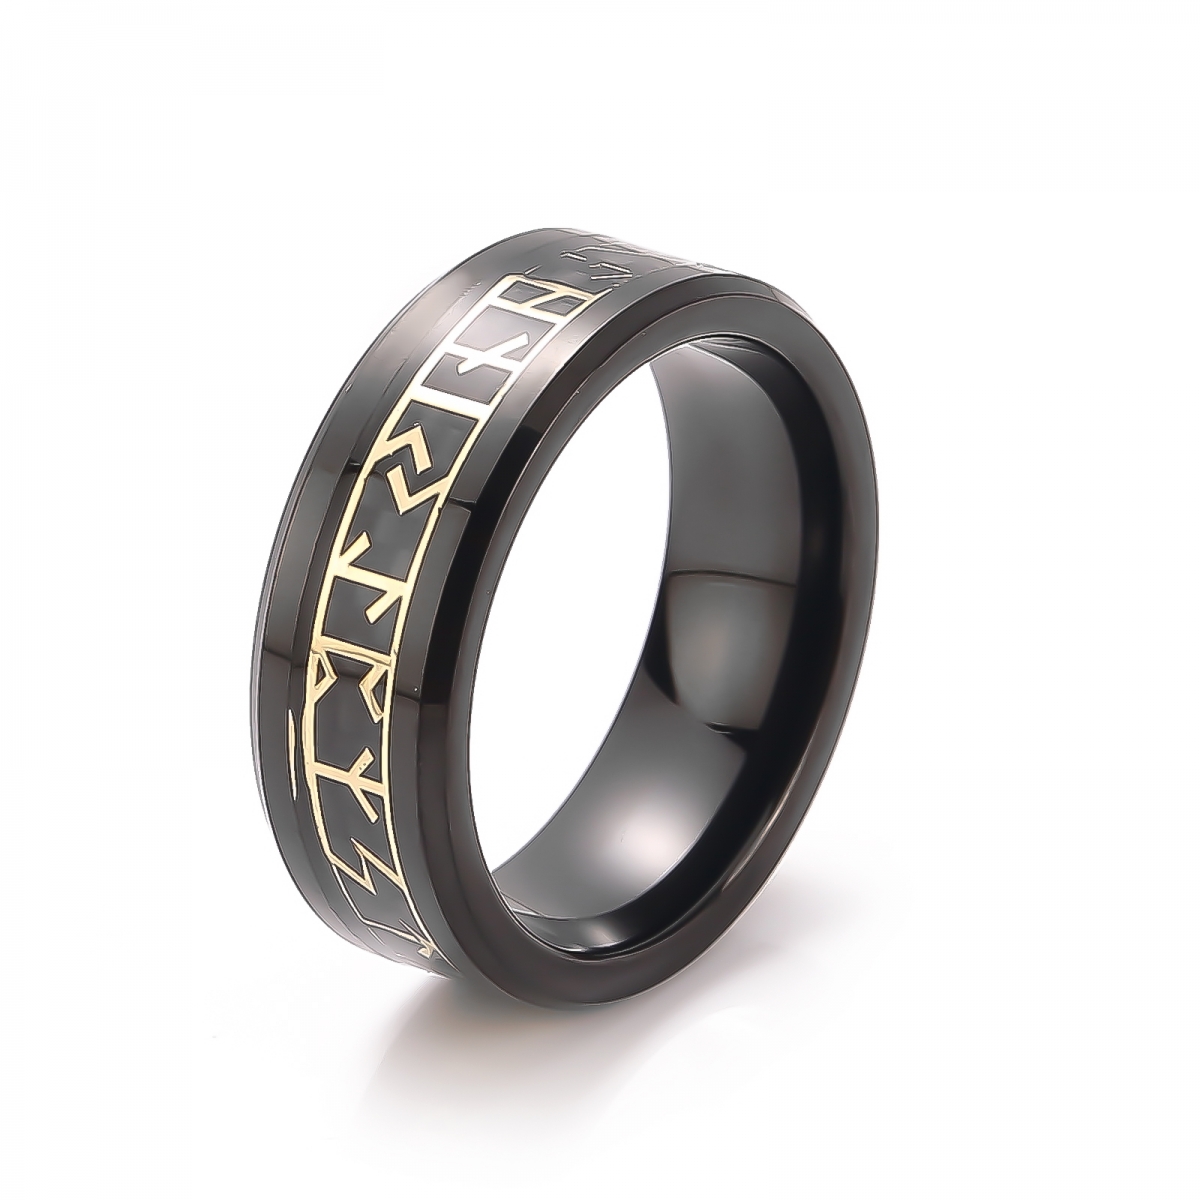 Tungsten Carbide Runes Ring US$5.8/PC-NORSECOLLECTION- Viking Jewelry,Viking Necklace,Viking Bracelet,Viking Rings,Viking Mugs,Viking Accessories,Viking Crafts